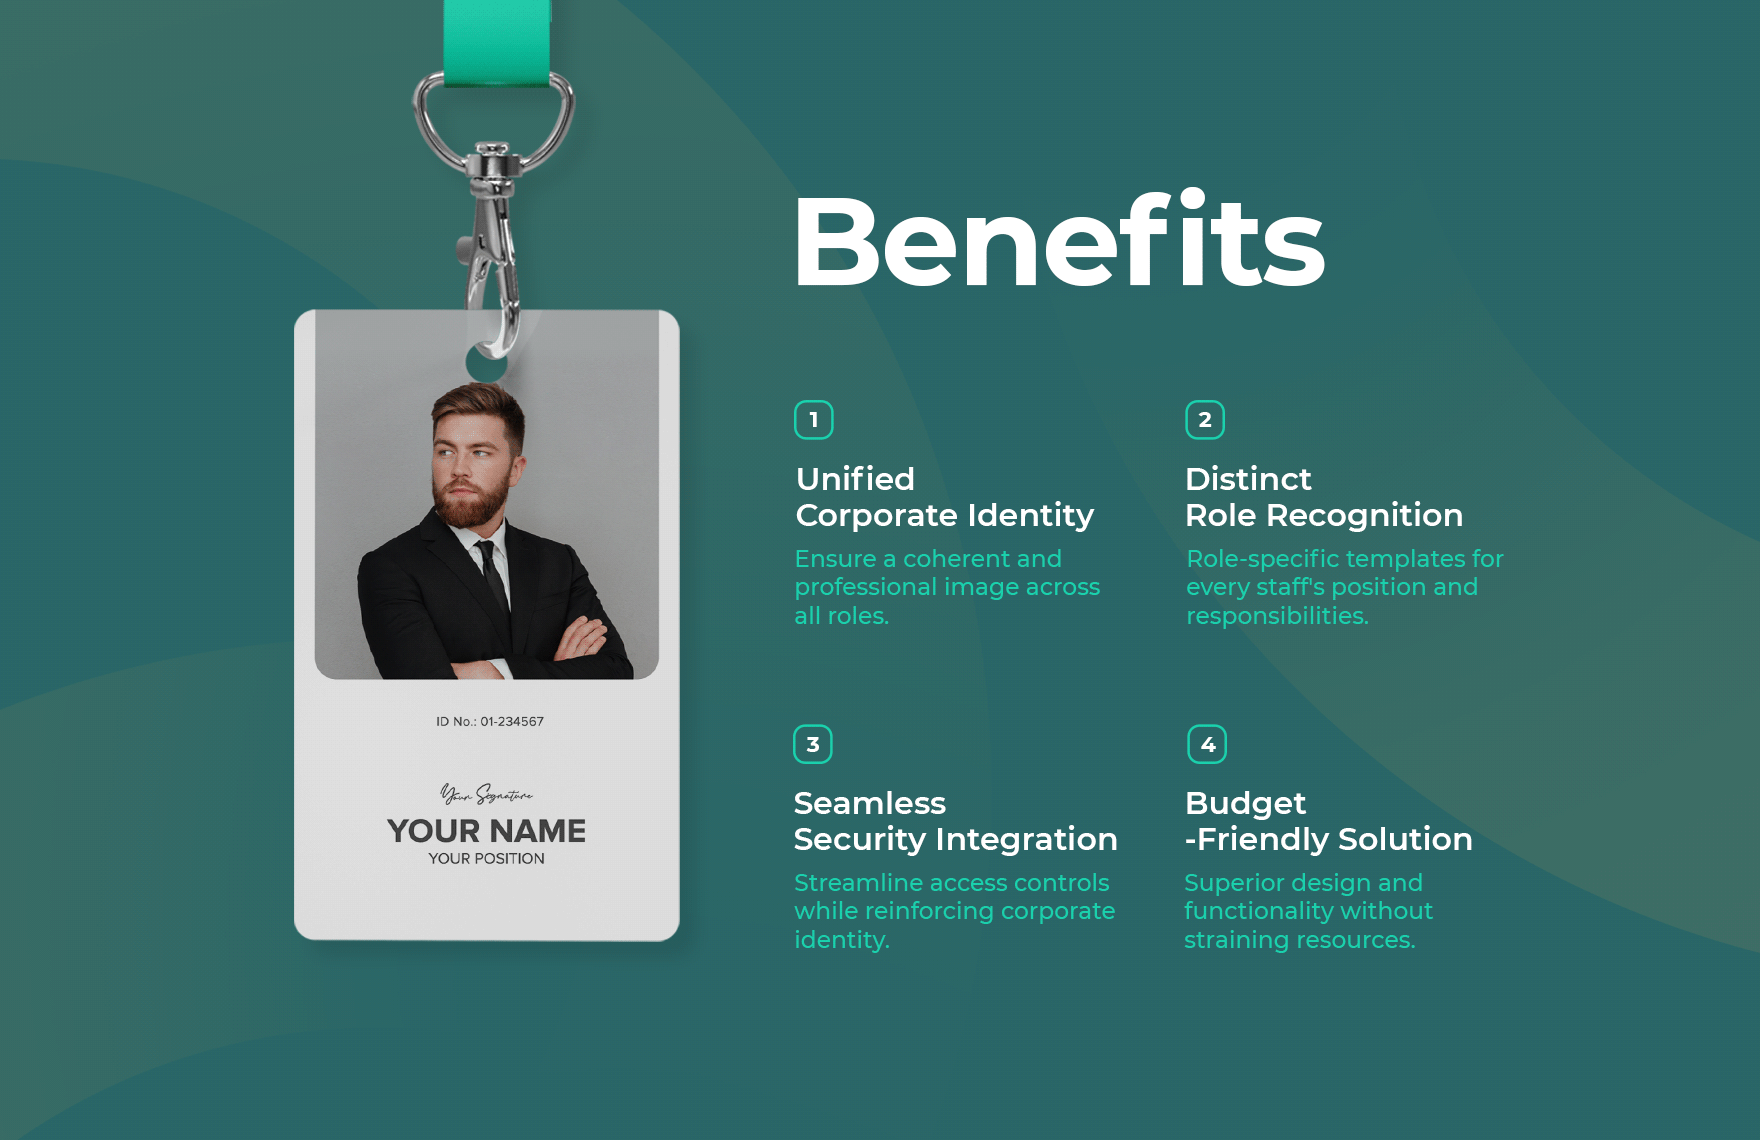 Financial Analyst ID Card Template